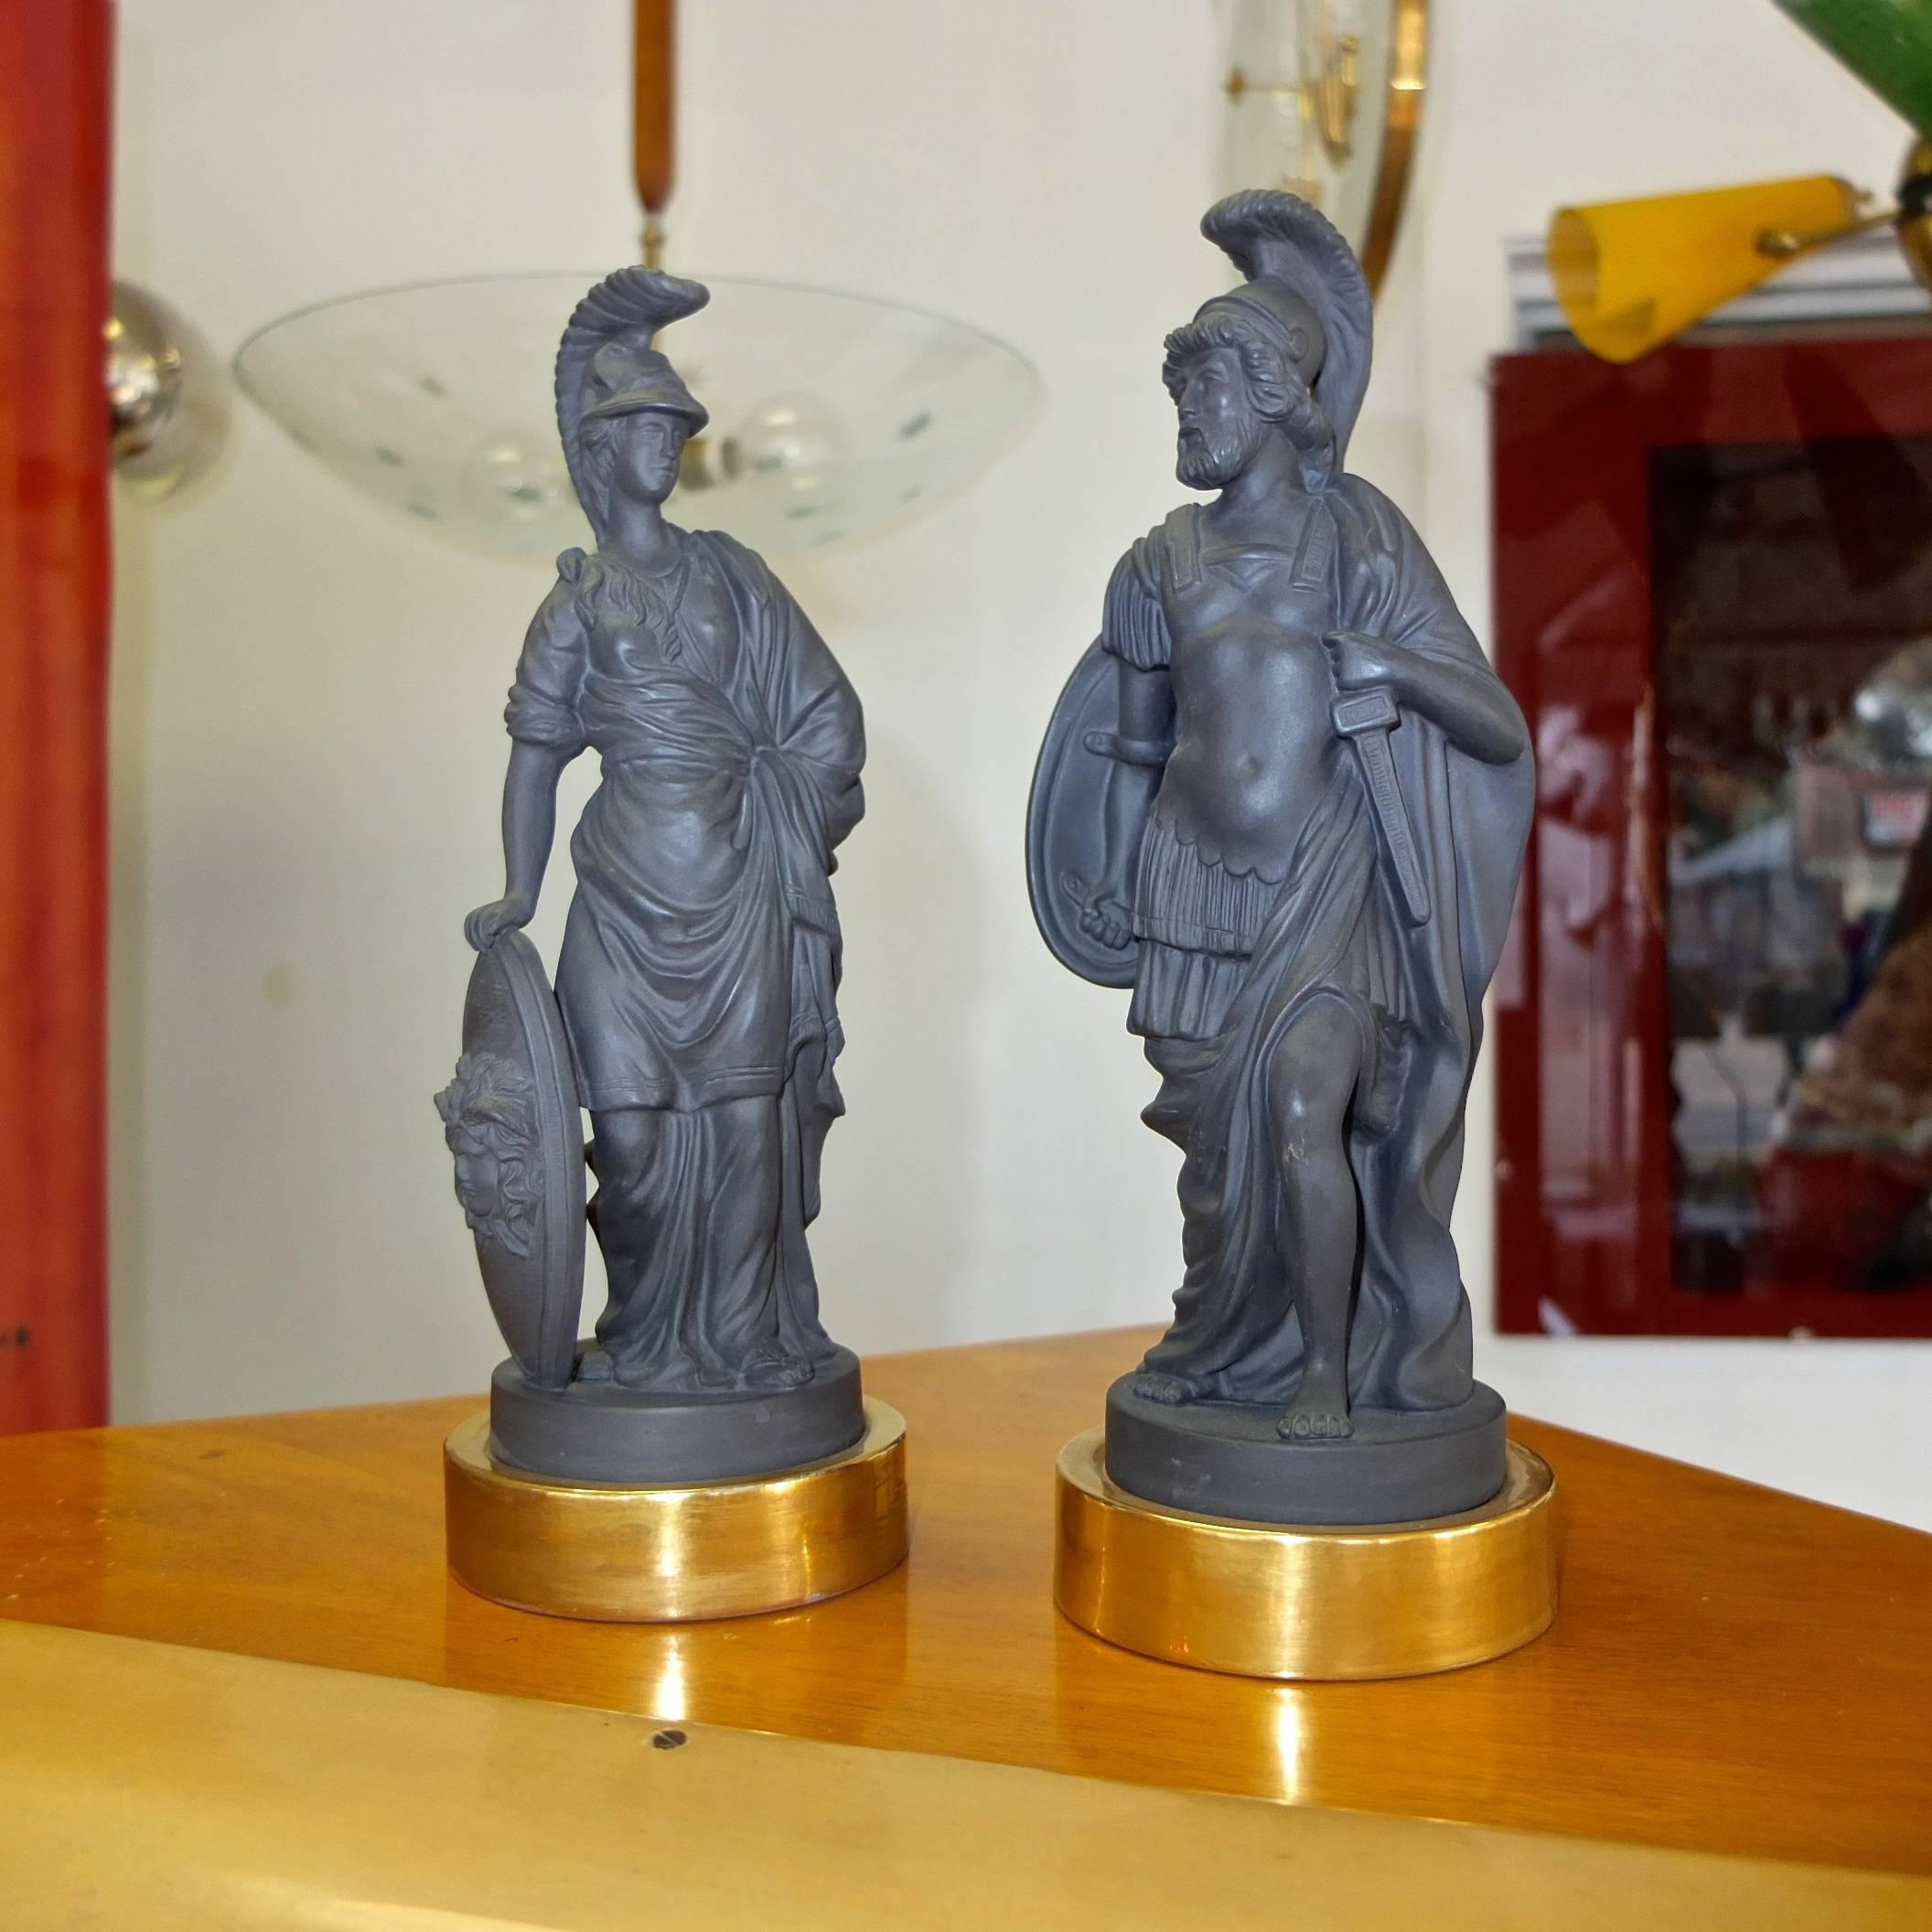 Mottahedeh basalt ceramic classical figures of Jupiter and Minerva, both bearing shields with the head of Medusa.

Ceramic with black basalt finish and gilt glazed base. Both figurines are marked on the underside with Mottahedeh / Italy.